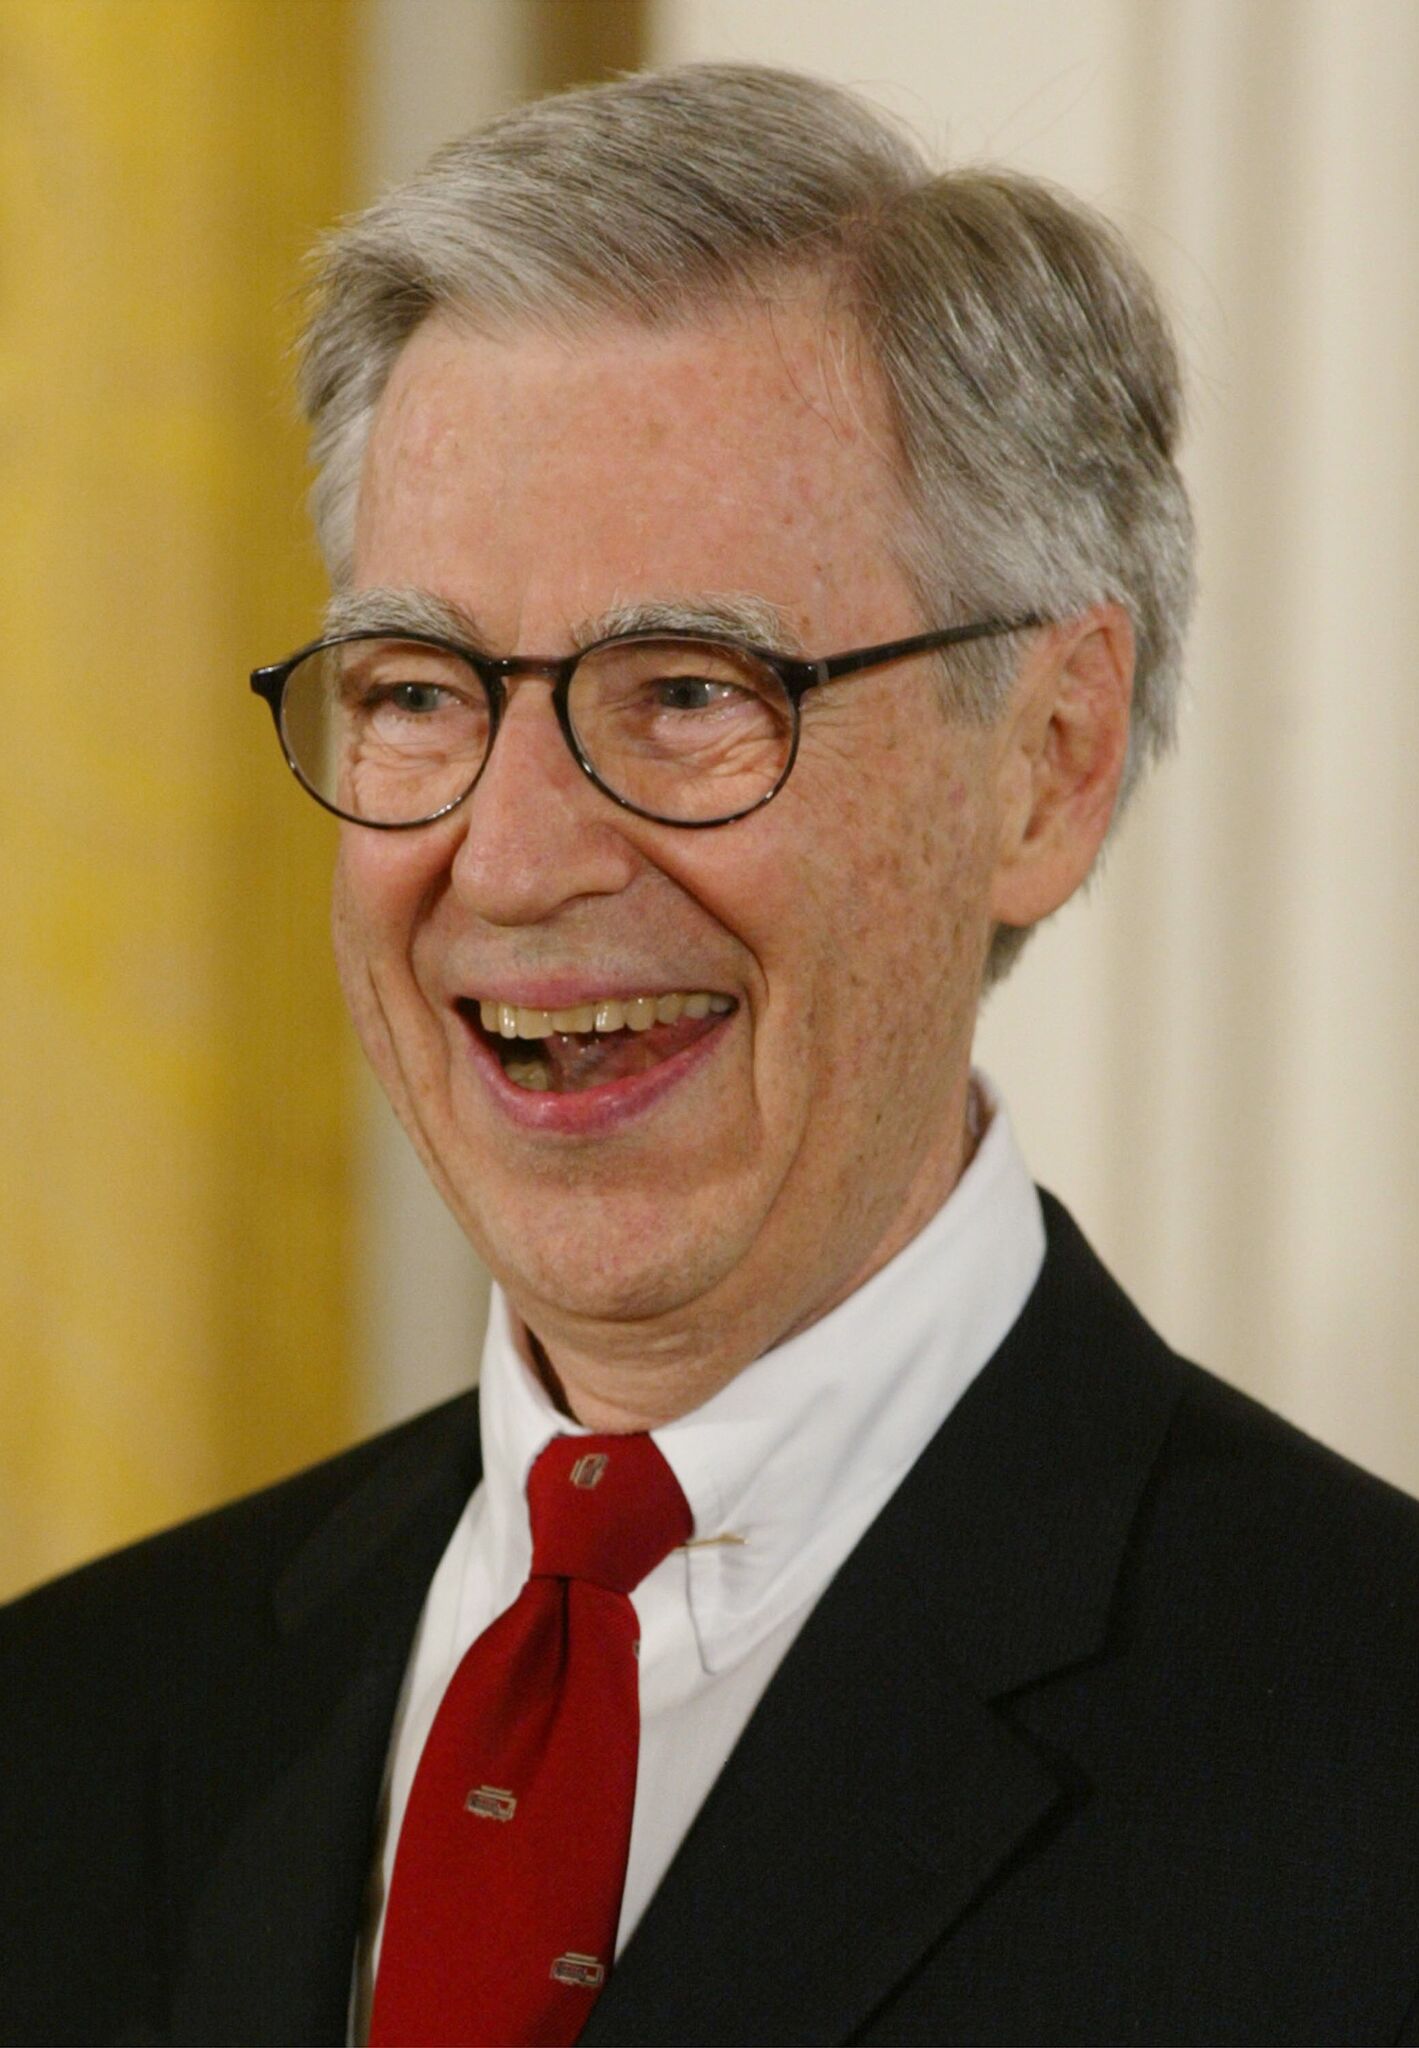 Fred Rogers smiles after receiving the Presidential Medal of Freedom Award from U.S. President George W. Bush, during a ceremony at the White House | Getty Images